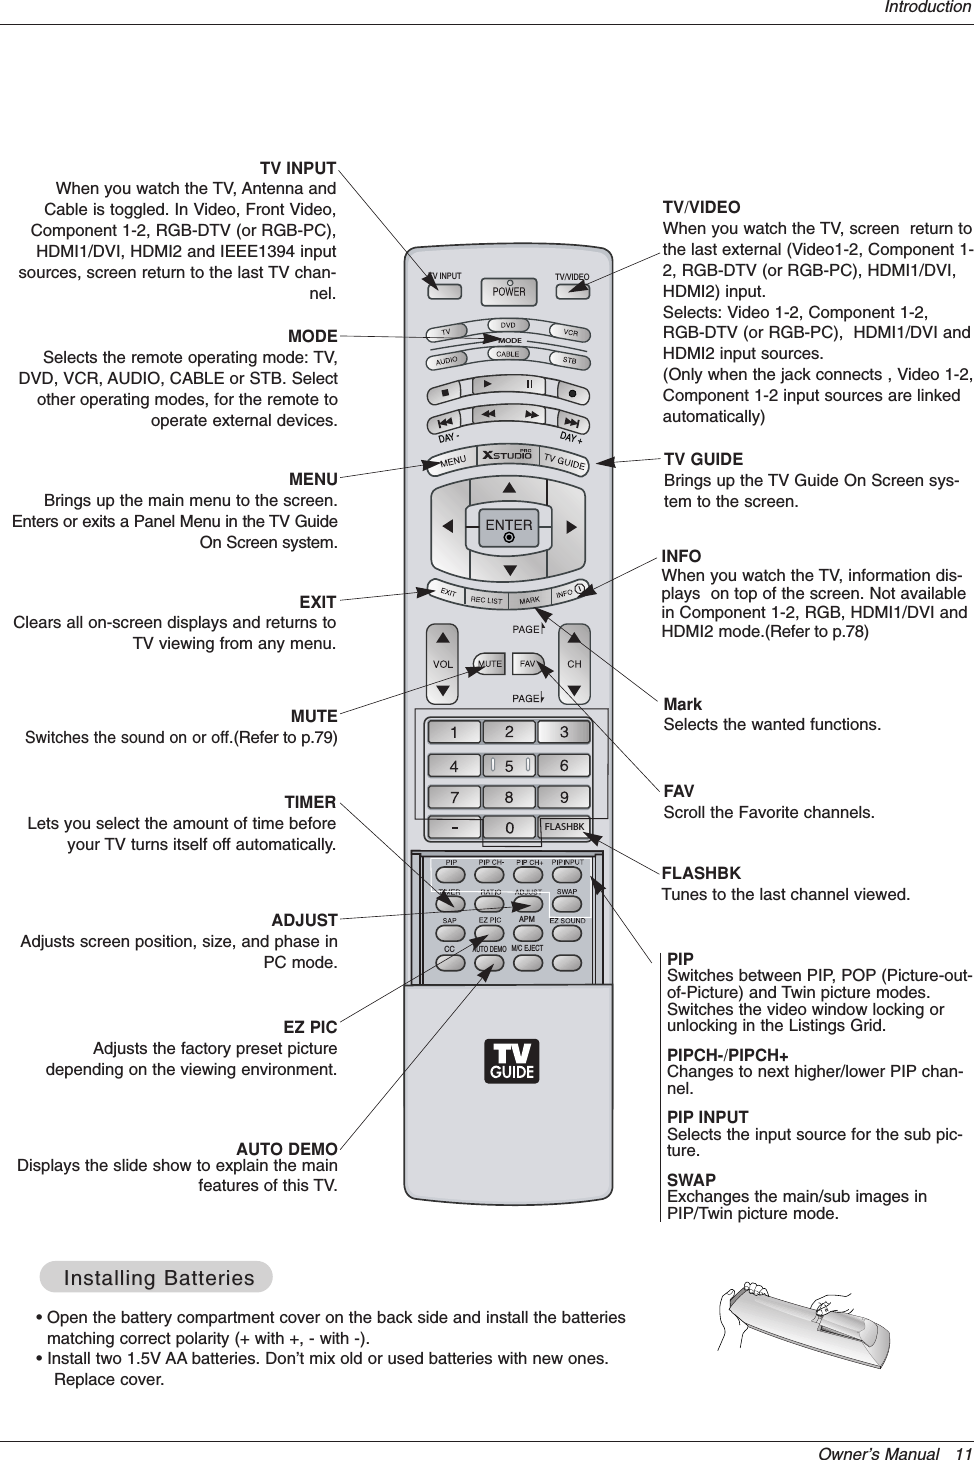 Owner’s Manual   11IntroductionMODEDAY -DAY +FLASHBKAPM   CCAUTO DEMOM/C EJECTTV INPUT TV/VIDEOTV INPUTWhen you watch the TV, Antenna andCable is toggled. In Video, Front Video,Component 1-2, RGB-DTV (or RGB-PC),HDMI1/DVI, HDMI2 and IEEE1394 inputsources, screen return to the last TV chan-nel.MUTESwitches the sound on or off.(Refer to p.79)MODESelects the remote operating mode: TV,DVD, VCR, AUDIO, CABLE or STB. Selectother operating modes, for the remote tooperate external devices.FLASHBKTunes to the last channel viewed.EXITClears all on-screen displays and returns toTV viewing from any menu.TIMER Lets you select the amount of time beforeyour TV turns itself off automatically.MENUBrings up the main menu to the screen.Enters or exits a Panel Menu in the TV GuideOn Screen system.PIPSwitches between PIP, POP (Picture-out-of-Picture) and Twin picture modes.Switches the video window locking orunlocking in the Listings Grid.PIPCH-/PIPCH+Changes to next higher/lower PIP chan-nel.PIP INPUTSelects the input source for the sub pic-ture.SWAPExchanges the main/sub images inPIP/Twin picture mode.EZ PICAdjusts the factory preset picturedepending on the viewing environment.ADJUSTAdjusts screen position, size, and phase inPC mode.AUTO DEMODisplays the slide show to explain the mainfeatures of this TV.  TV/VIDEOWhen you watch the TV, screen  return tothe last external (Video1-2, Component 1-2, RGB-DTV (or RGB-PC), HDMI1/DVI,HDMI2) input.Selects: Video 1-2, Component 1-2,RGB-DTV (or RGB-PC),  HDMI1/DVI andHDMI2 input sources.(Only when the jack connects , Video 1-2,Component 1-2 input sources are linkedautomatically)INFOWhen you watch the TV, information dis-plays  on top of the screen. Not availablein Component 1-2, RGB, HDMI1/DVI andHDMI2 mode.(Refer to p.78)FAVScroll the Favorite channels.TV GUIDEBrings up the TV Guide On Screen sys-tem to the screen.MarkSelects the wanted functions.• Open the battery compartment cover on the back side and install the batteriesmatching correct polarity (+ with +, - with -).• Install two 1.5V AA batteries. Don’t mix old or used batteries with new ones.Replace cover.Installing BatteriesInstalling Batteries